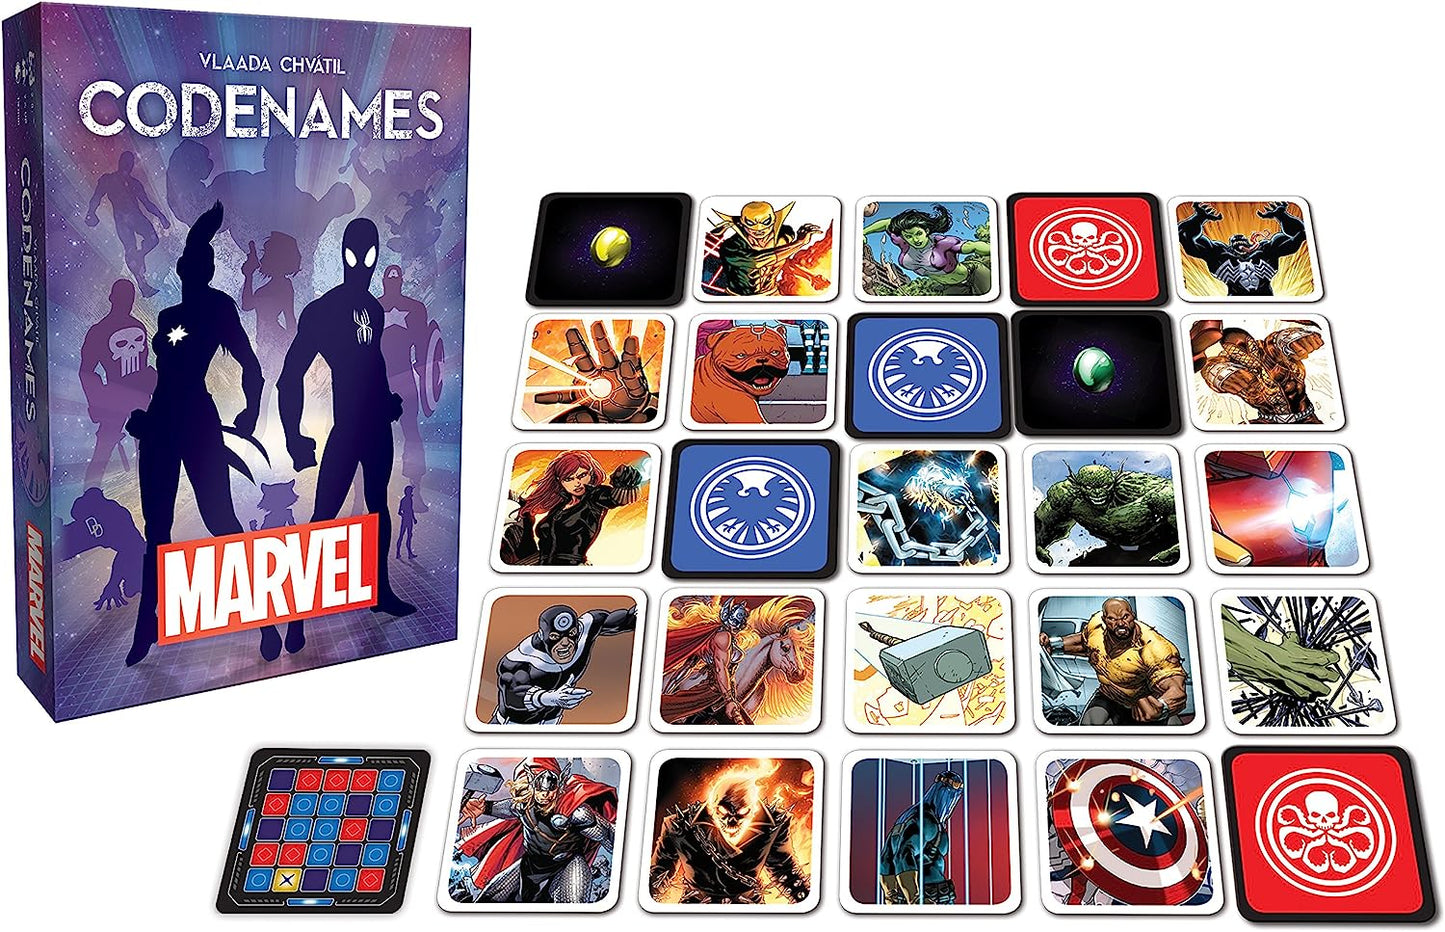 Codenames | Based On The Hit Social Word Game Codenames | Relive Memorable Moments From The Comic Universe | Fun Board Game For The Whole Family